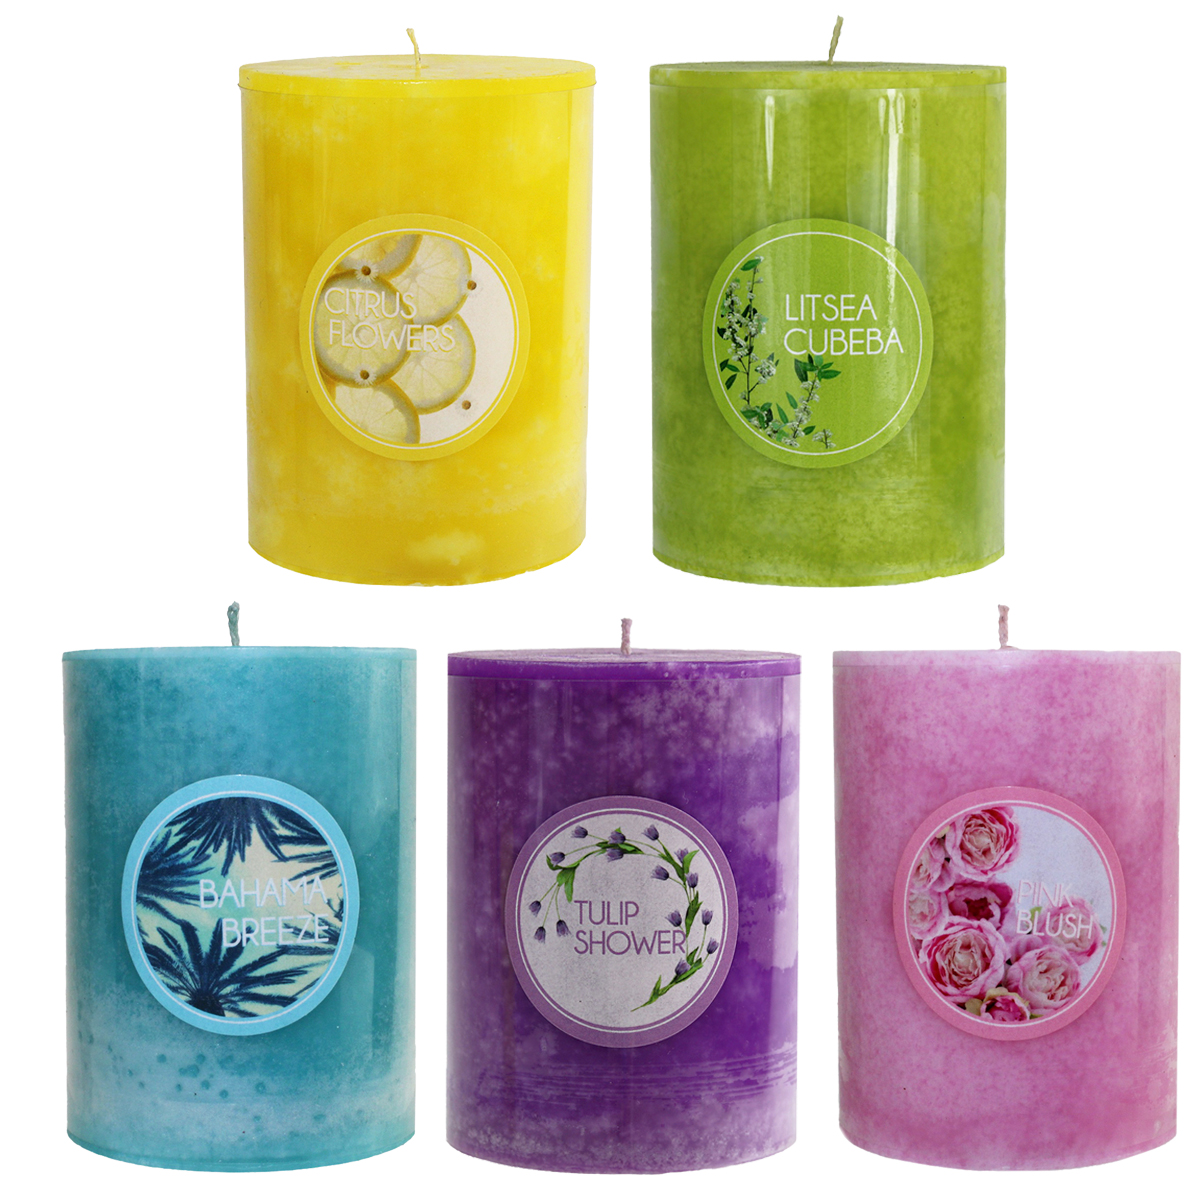 3" x 4" SCENTED MOTTLED PILLAR CANDLE